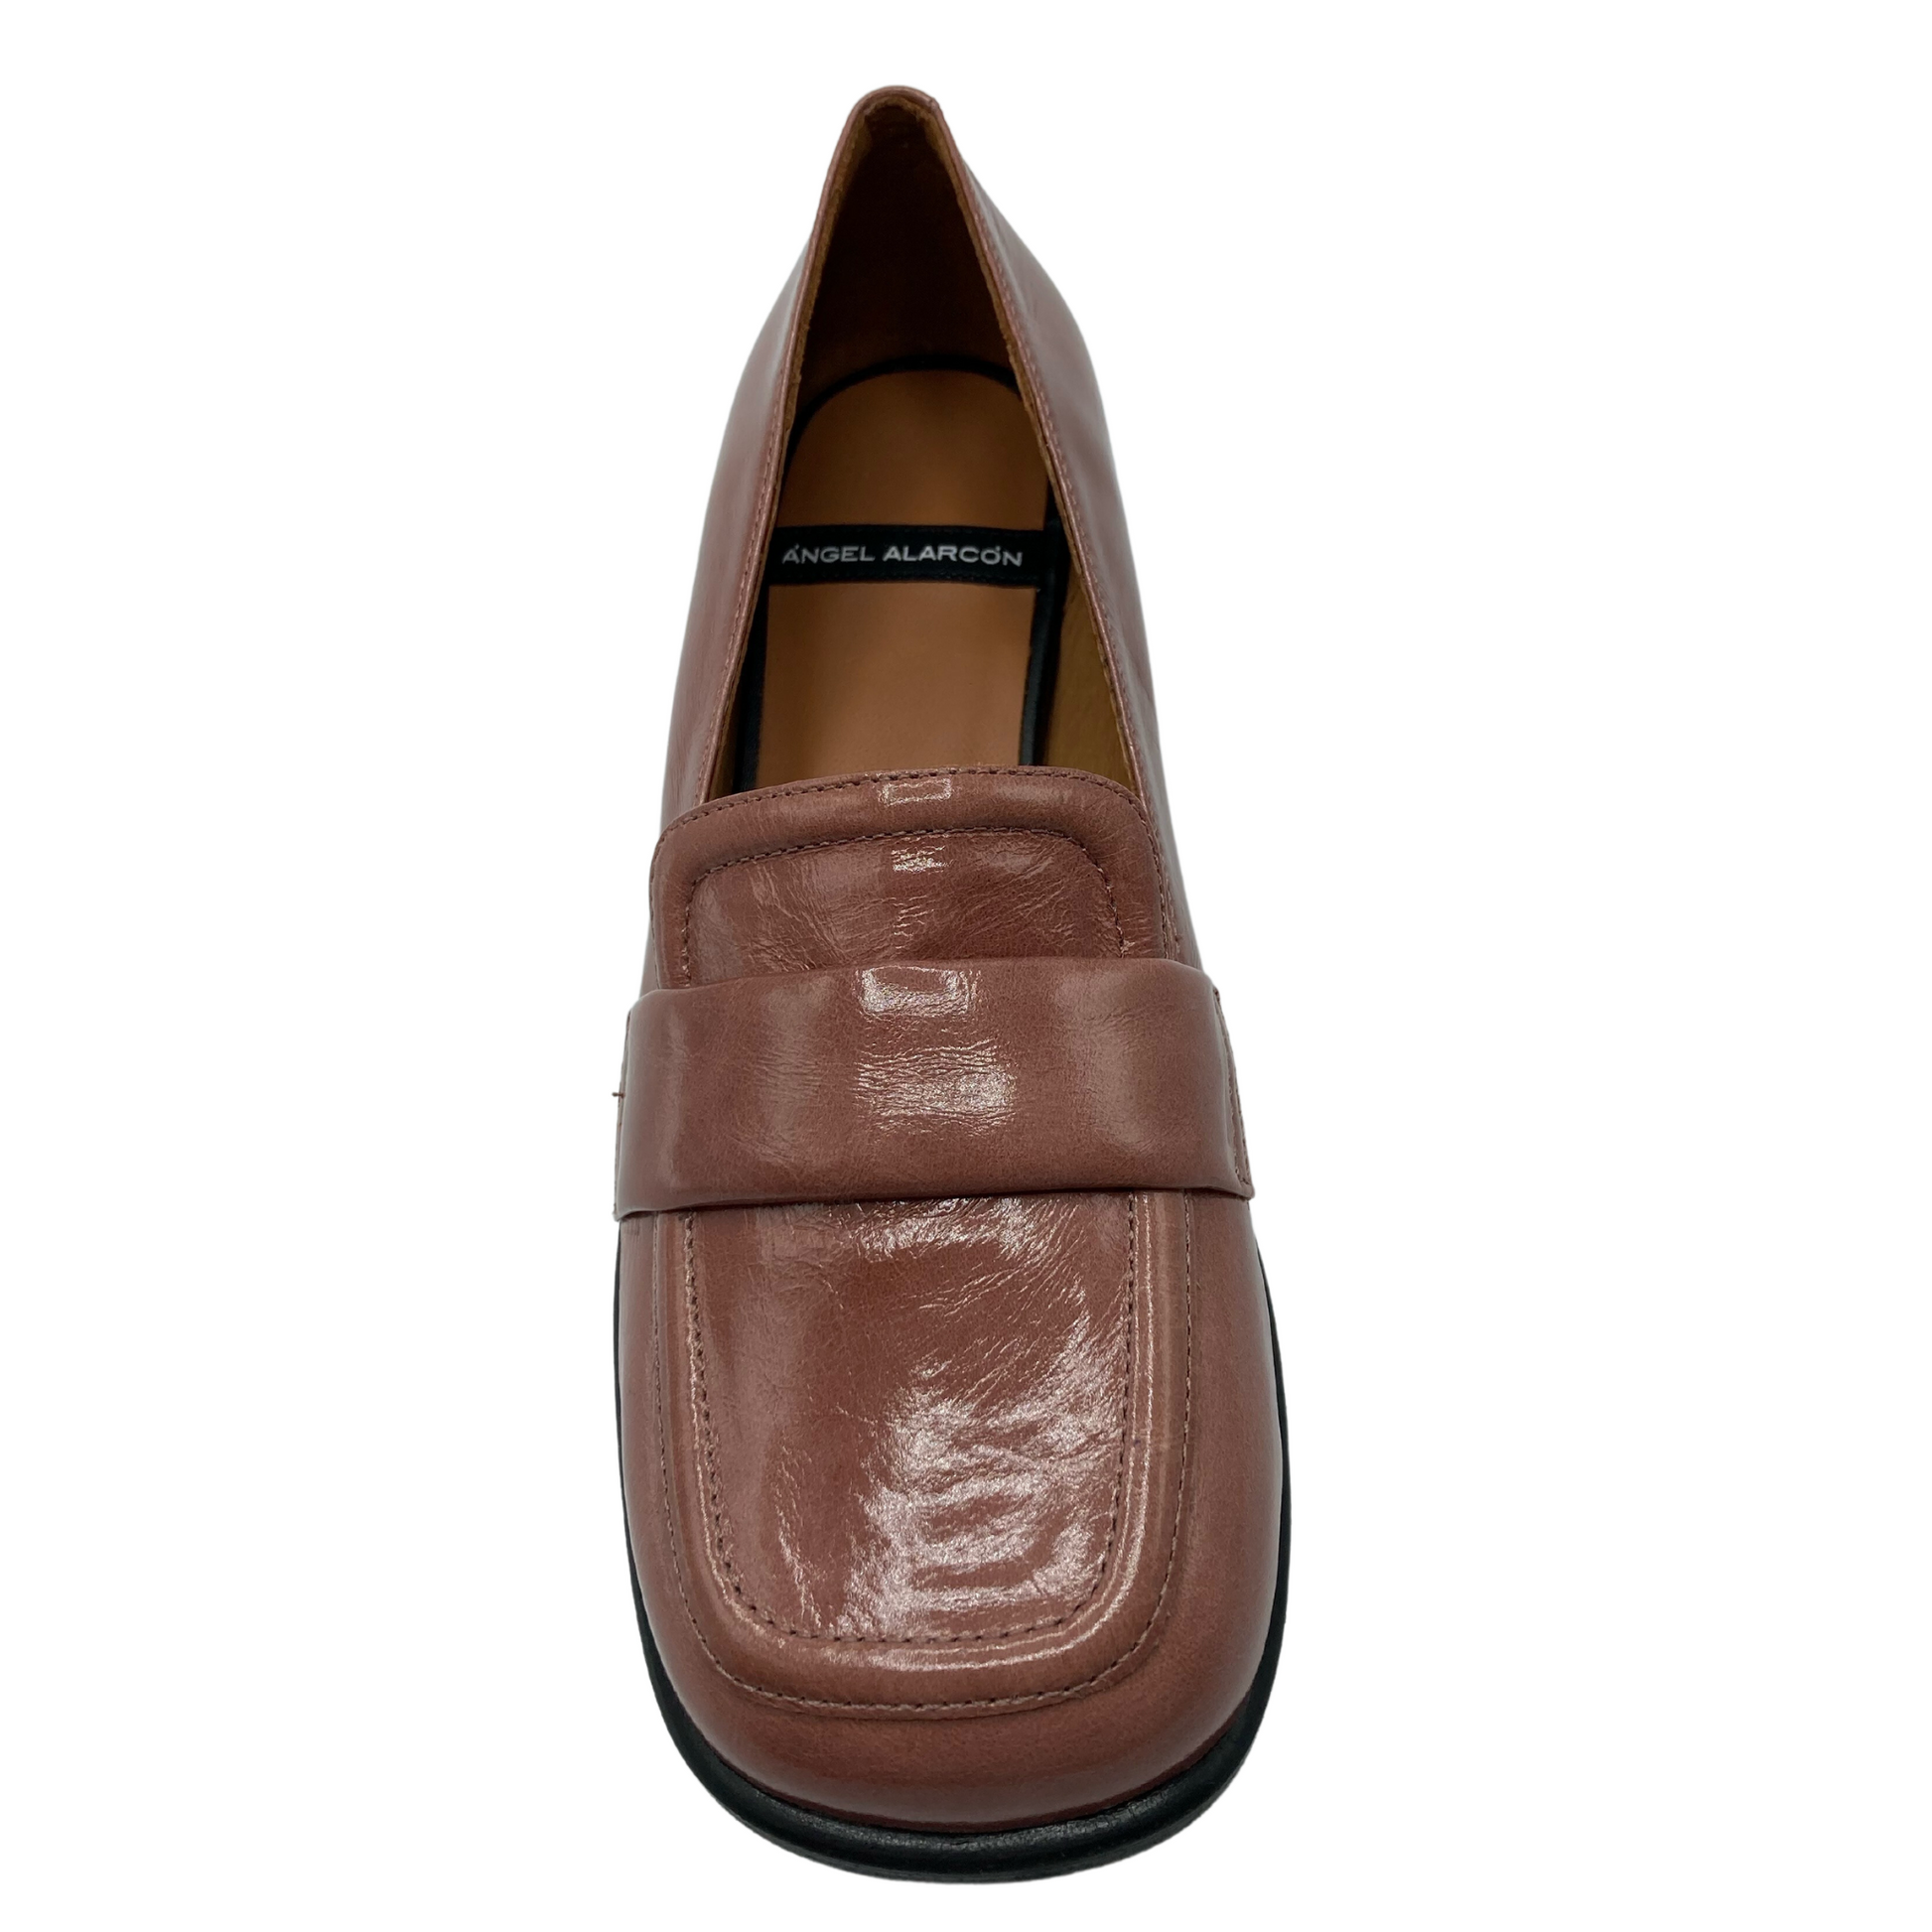 Top view of brown patent leather loafer with slight square toe